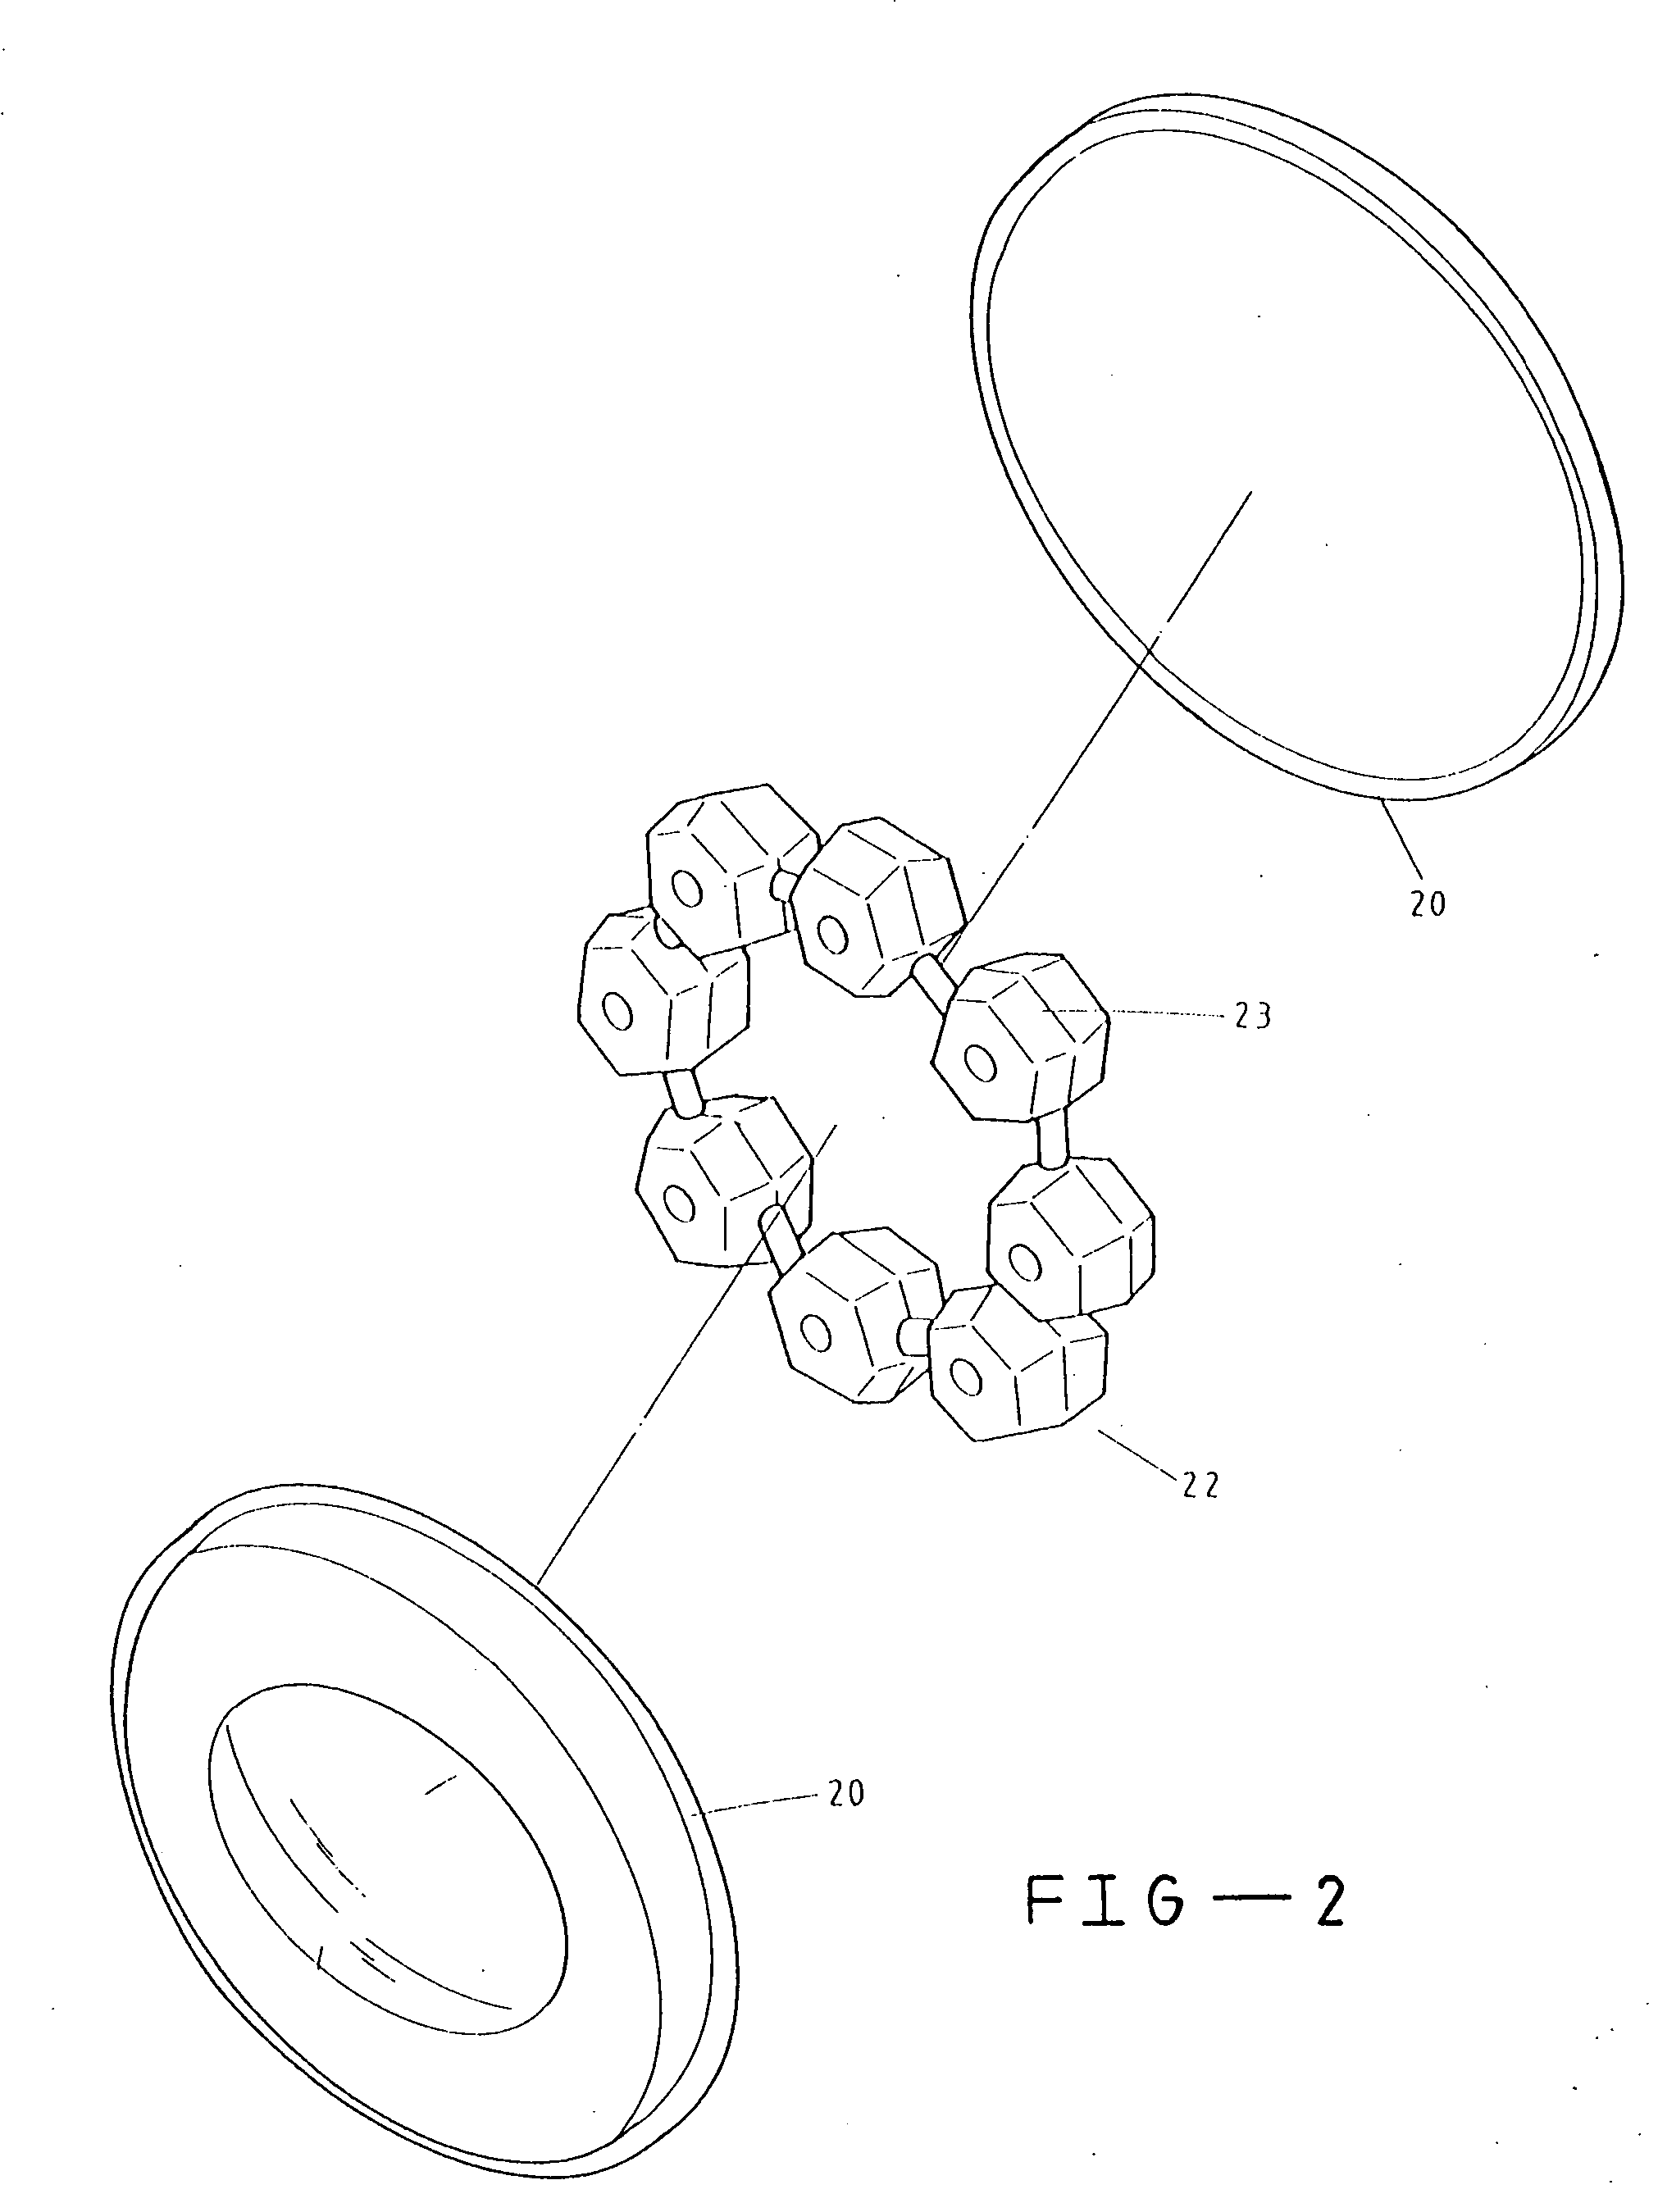 Shoe pad structure having an air chamber